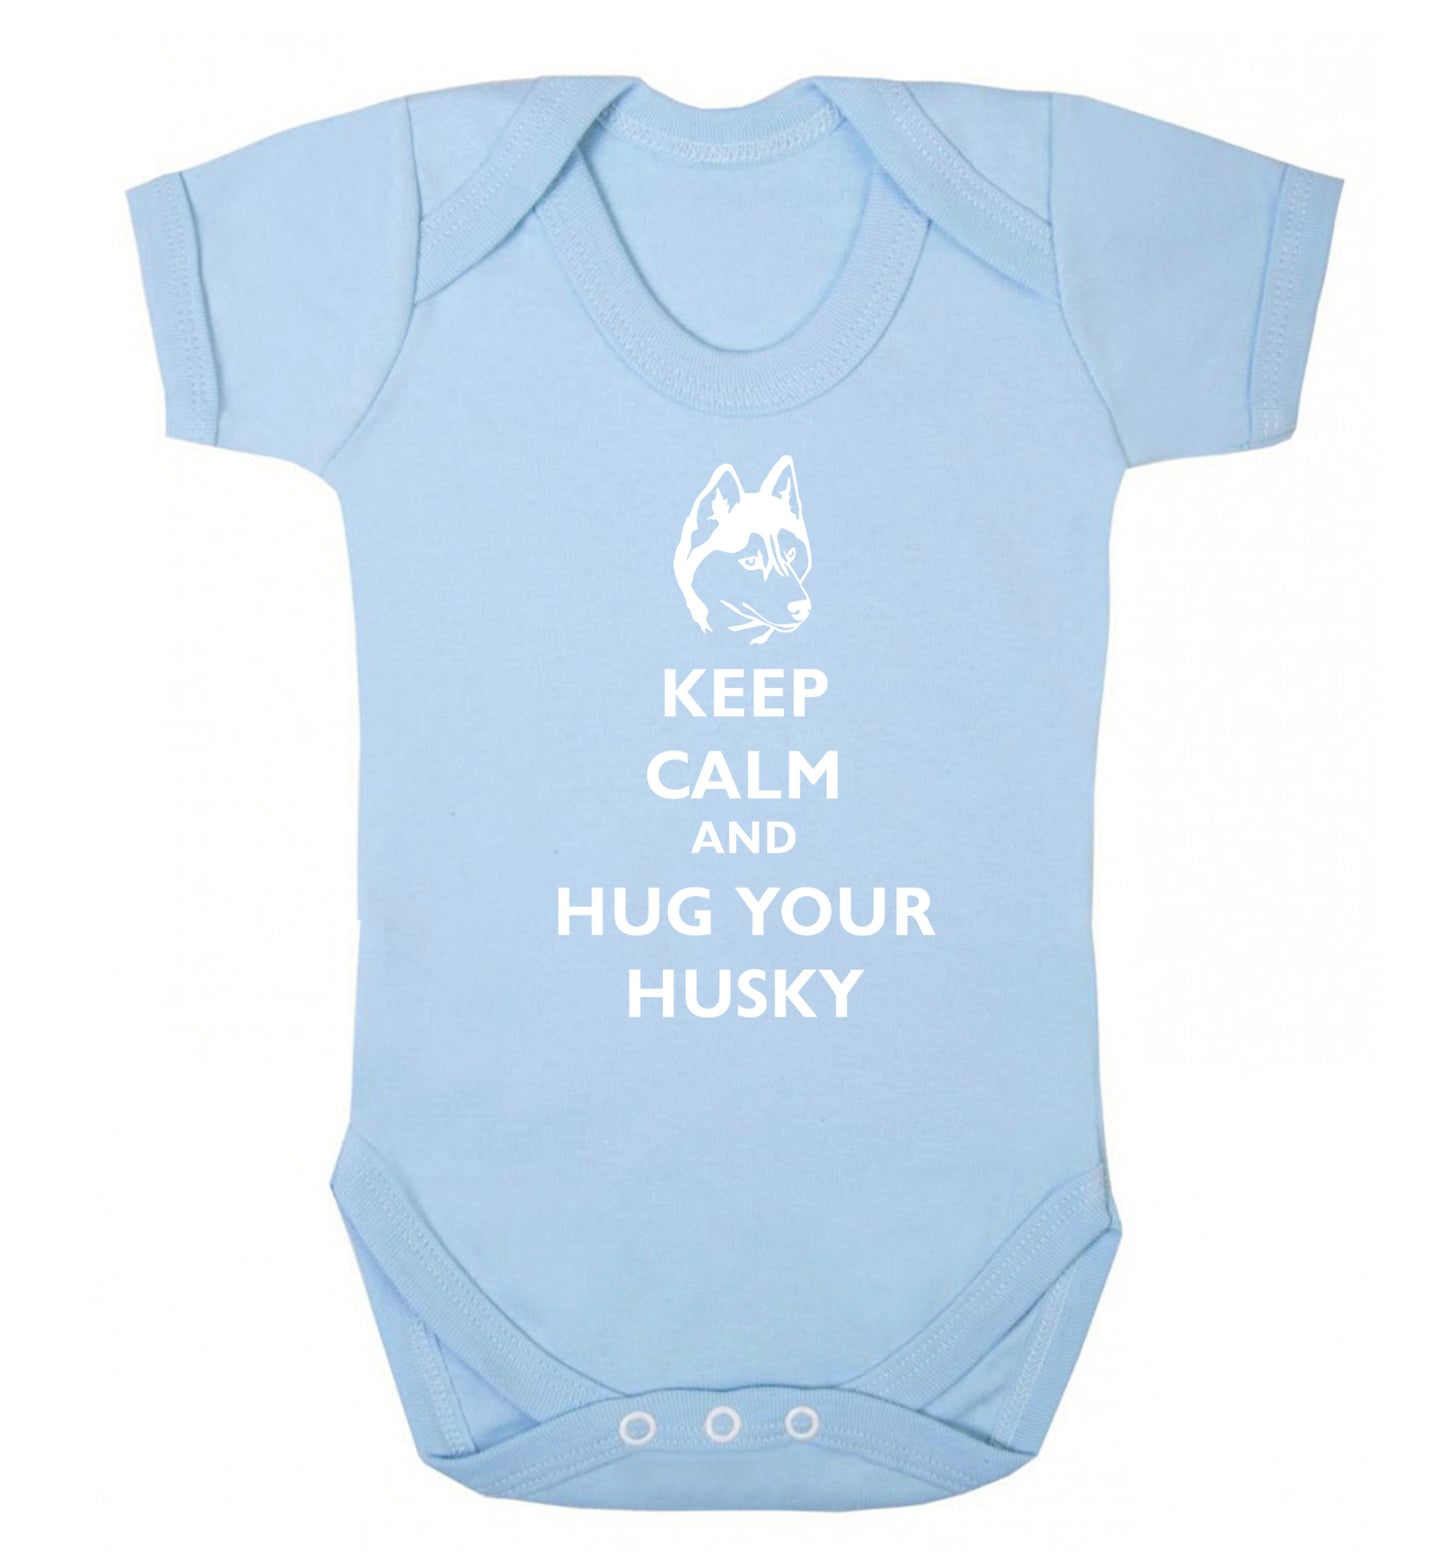 Keep calm and hug your husky Baby Vest pale blue 18-24 months